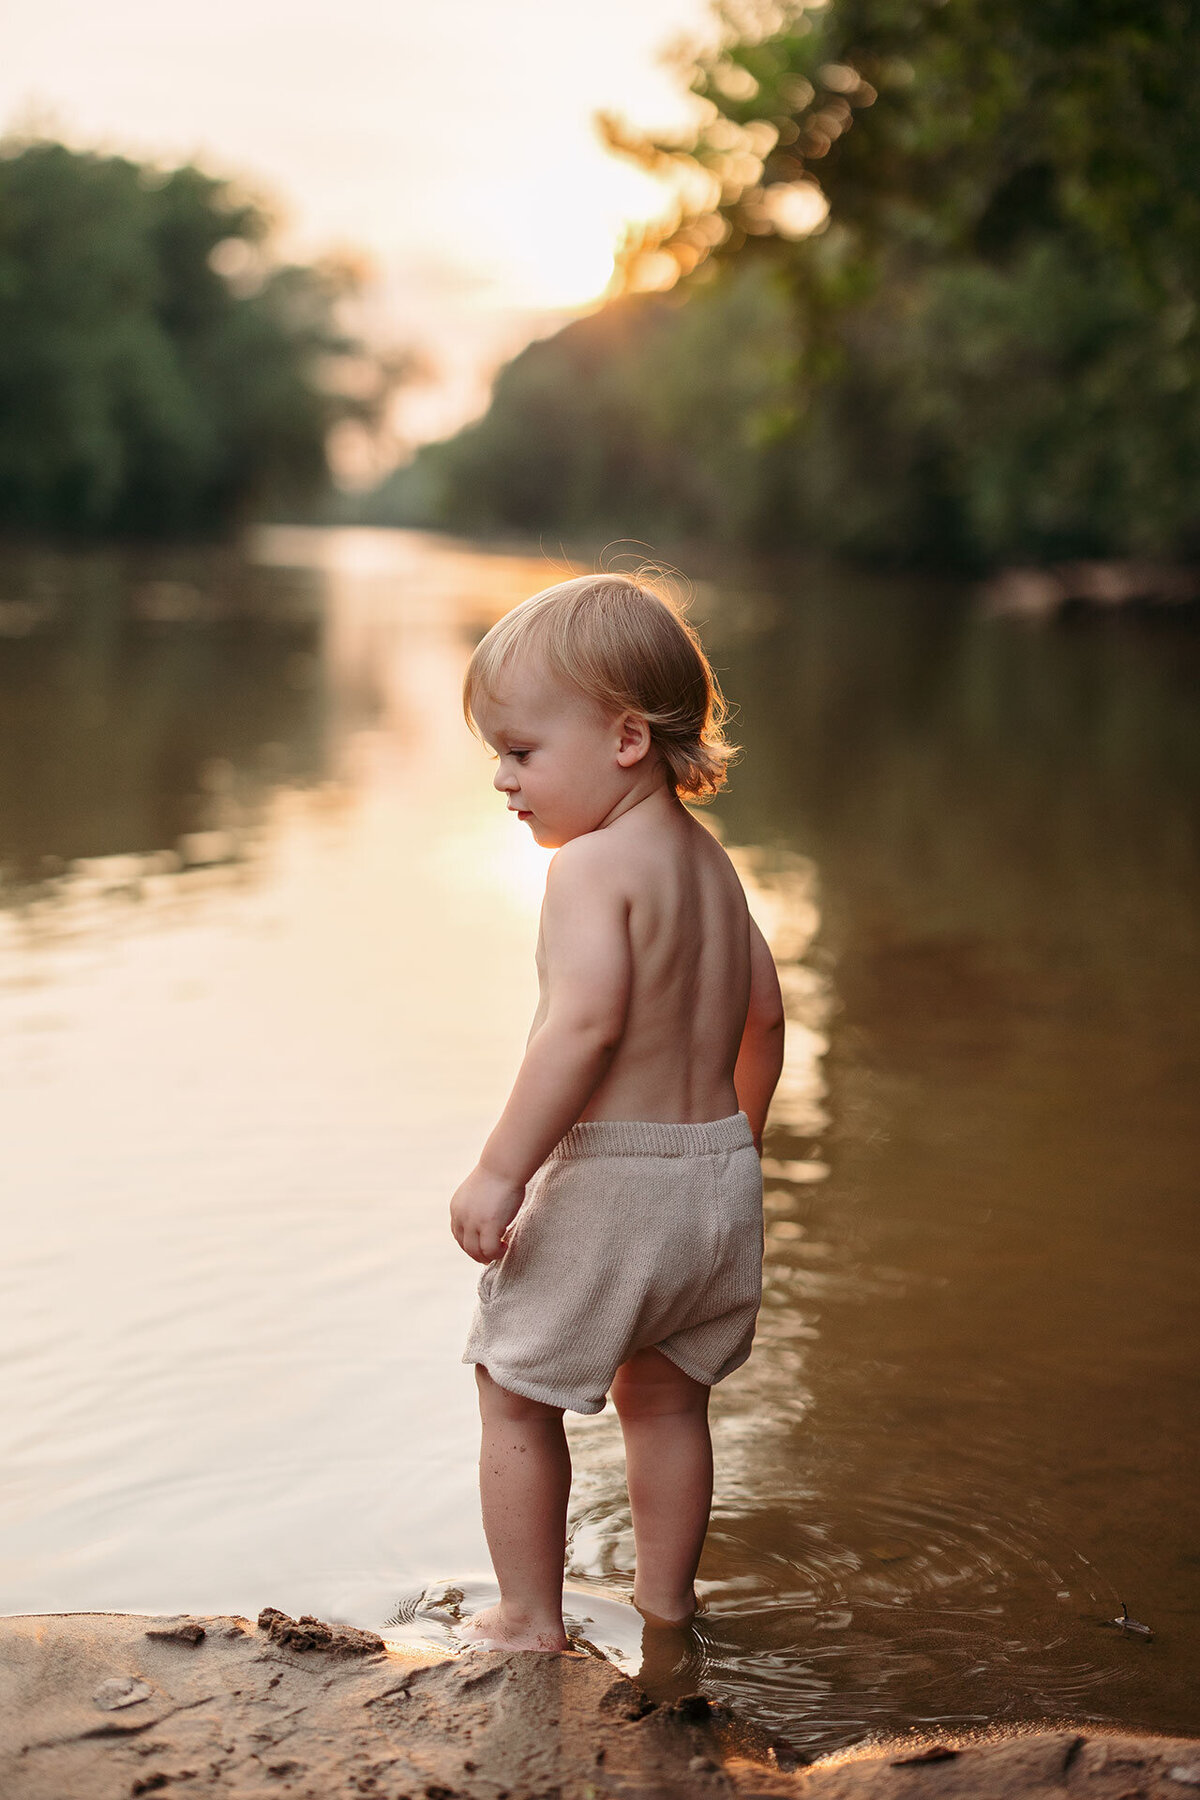 memphis baby photography 4 by jen howell